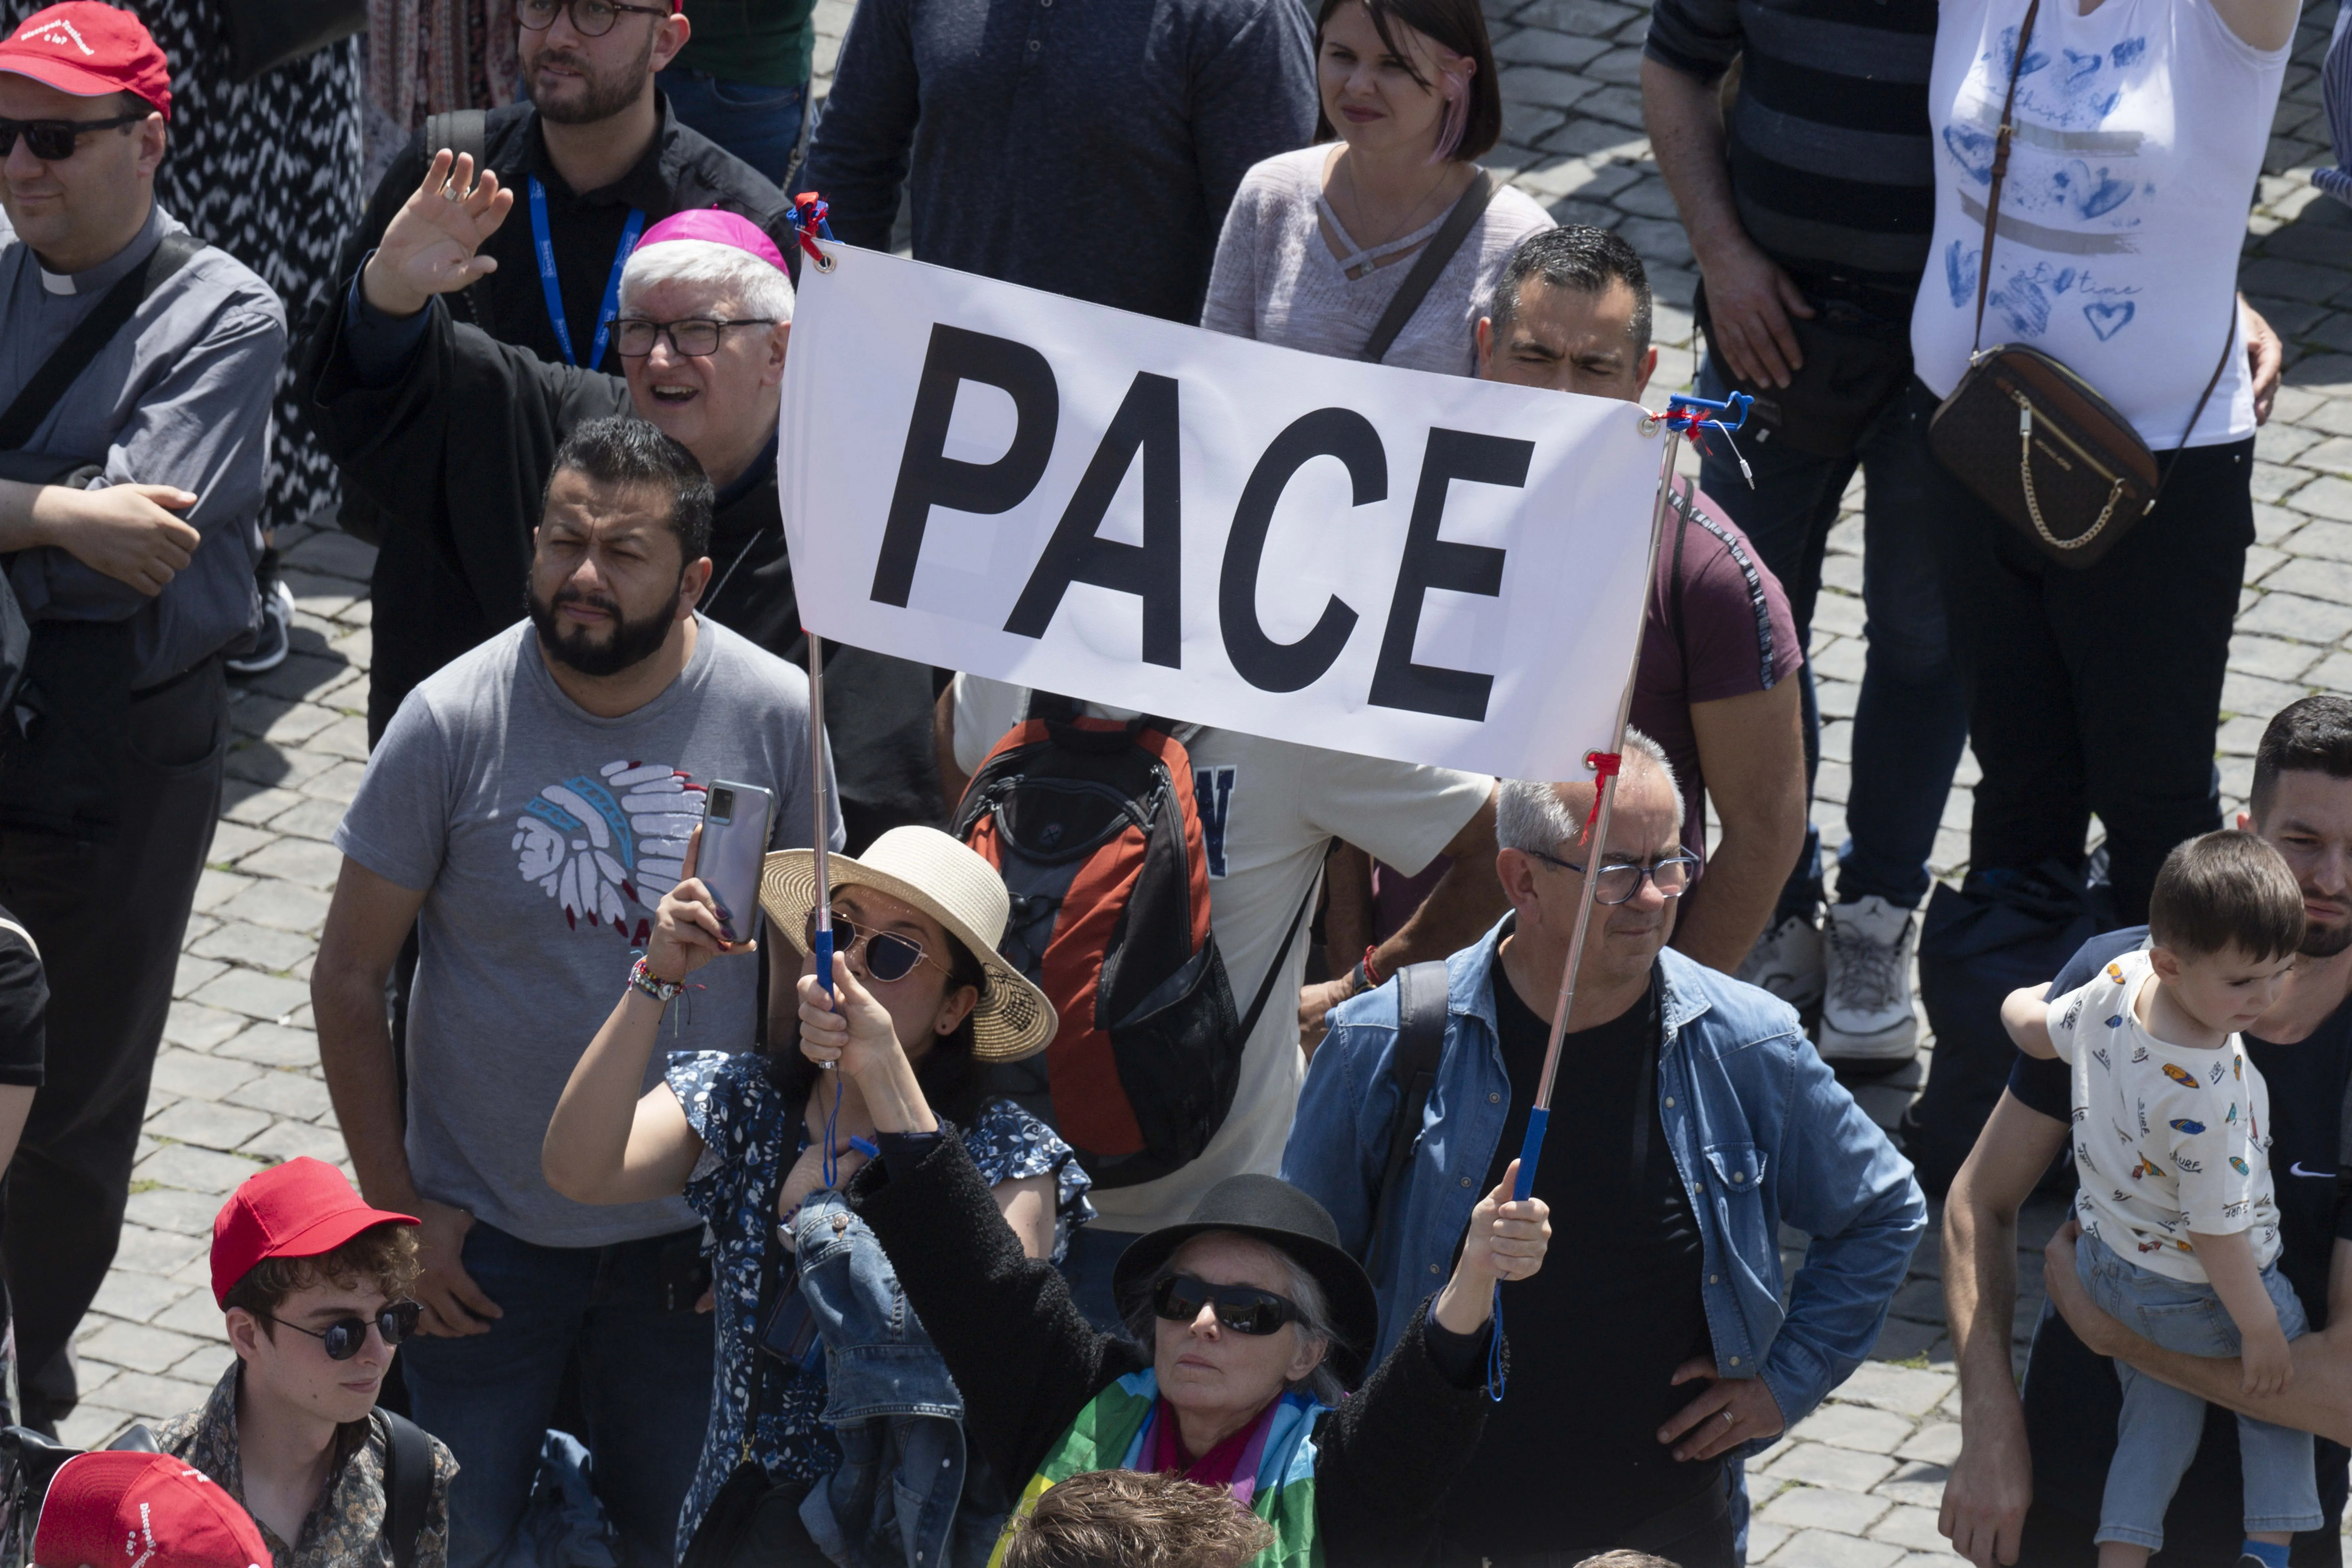 Pilgrims in St. Peter's Square hold up a sign that says "pace," which means "peace" in Italian. Vatican Media